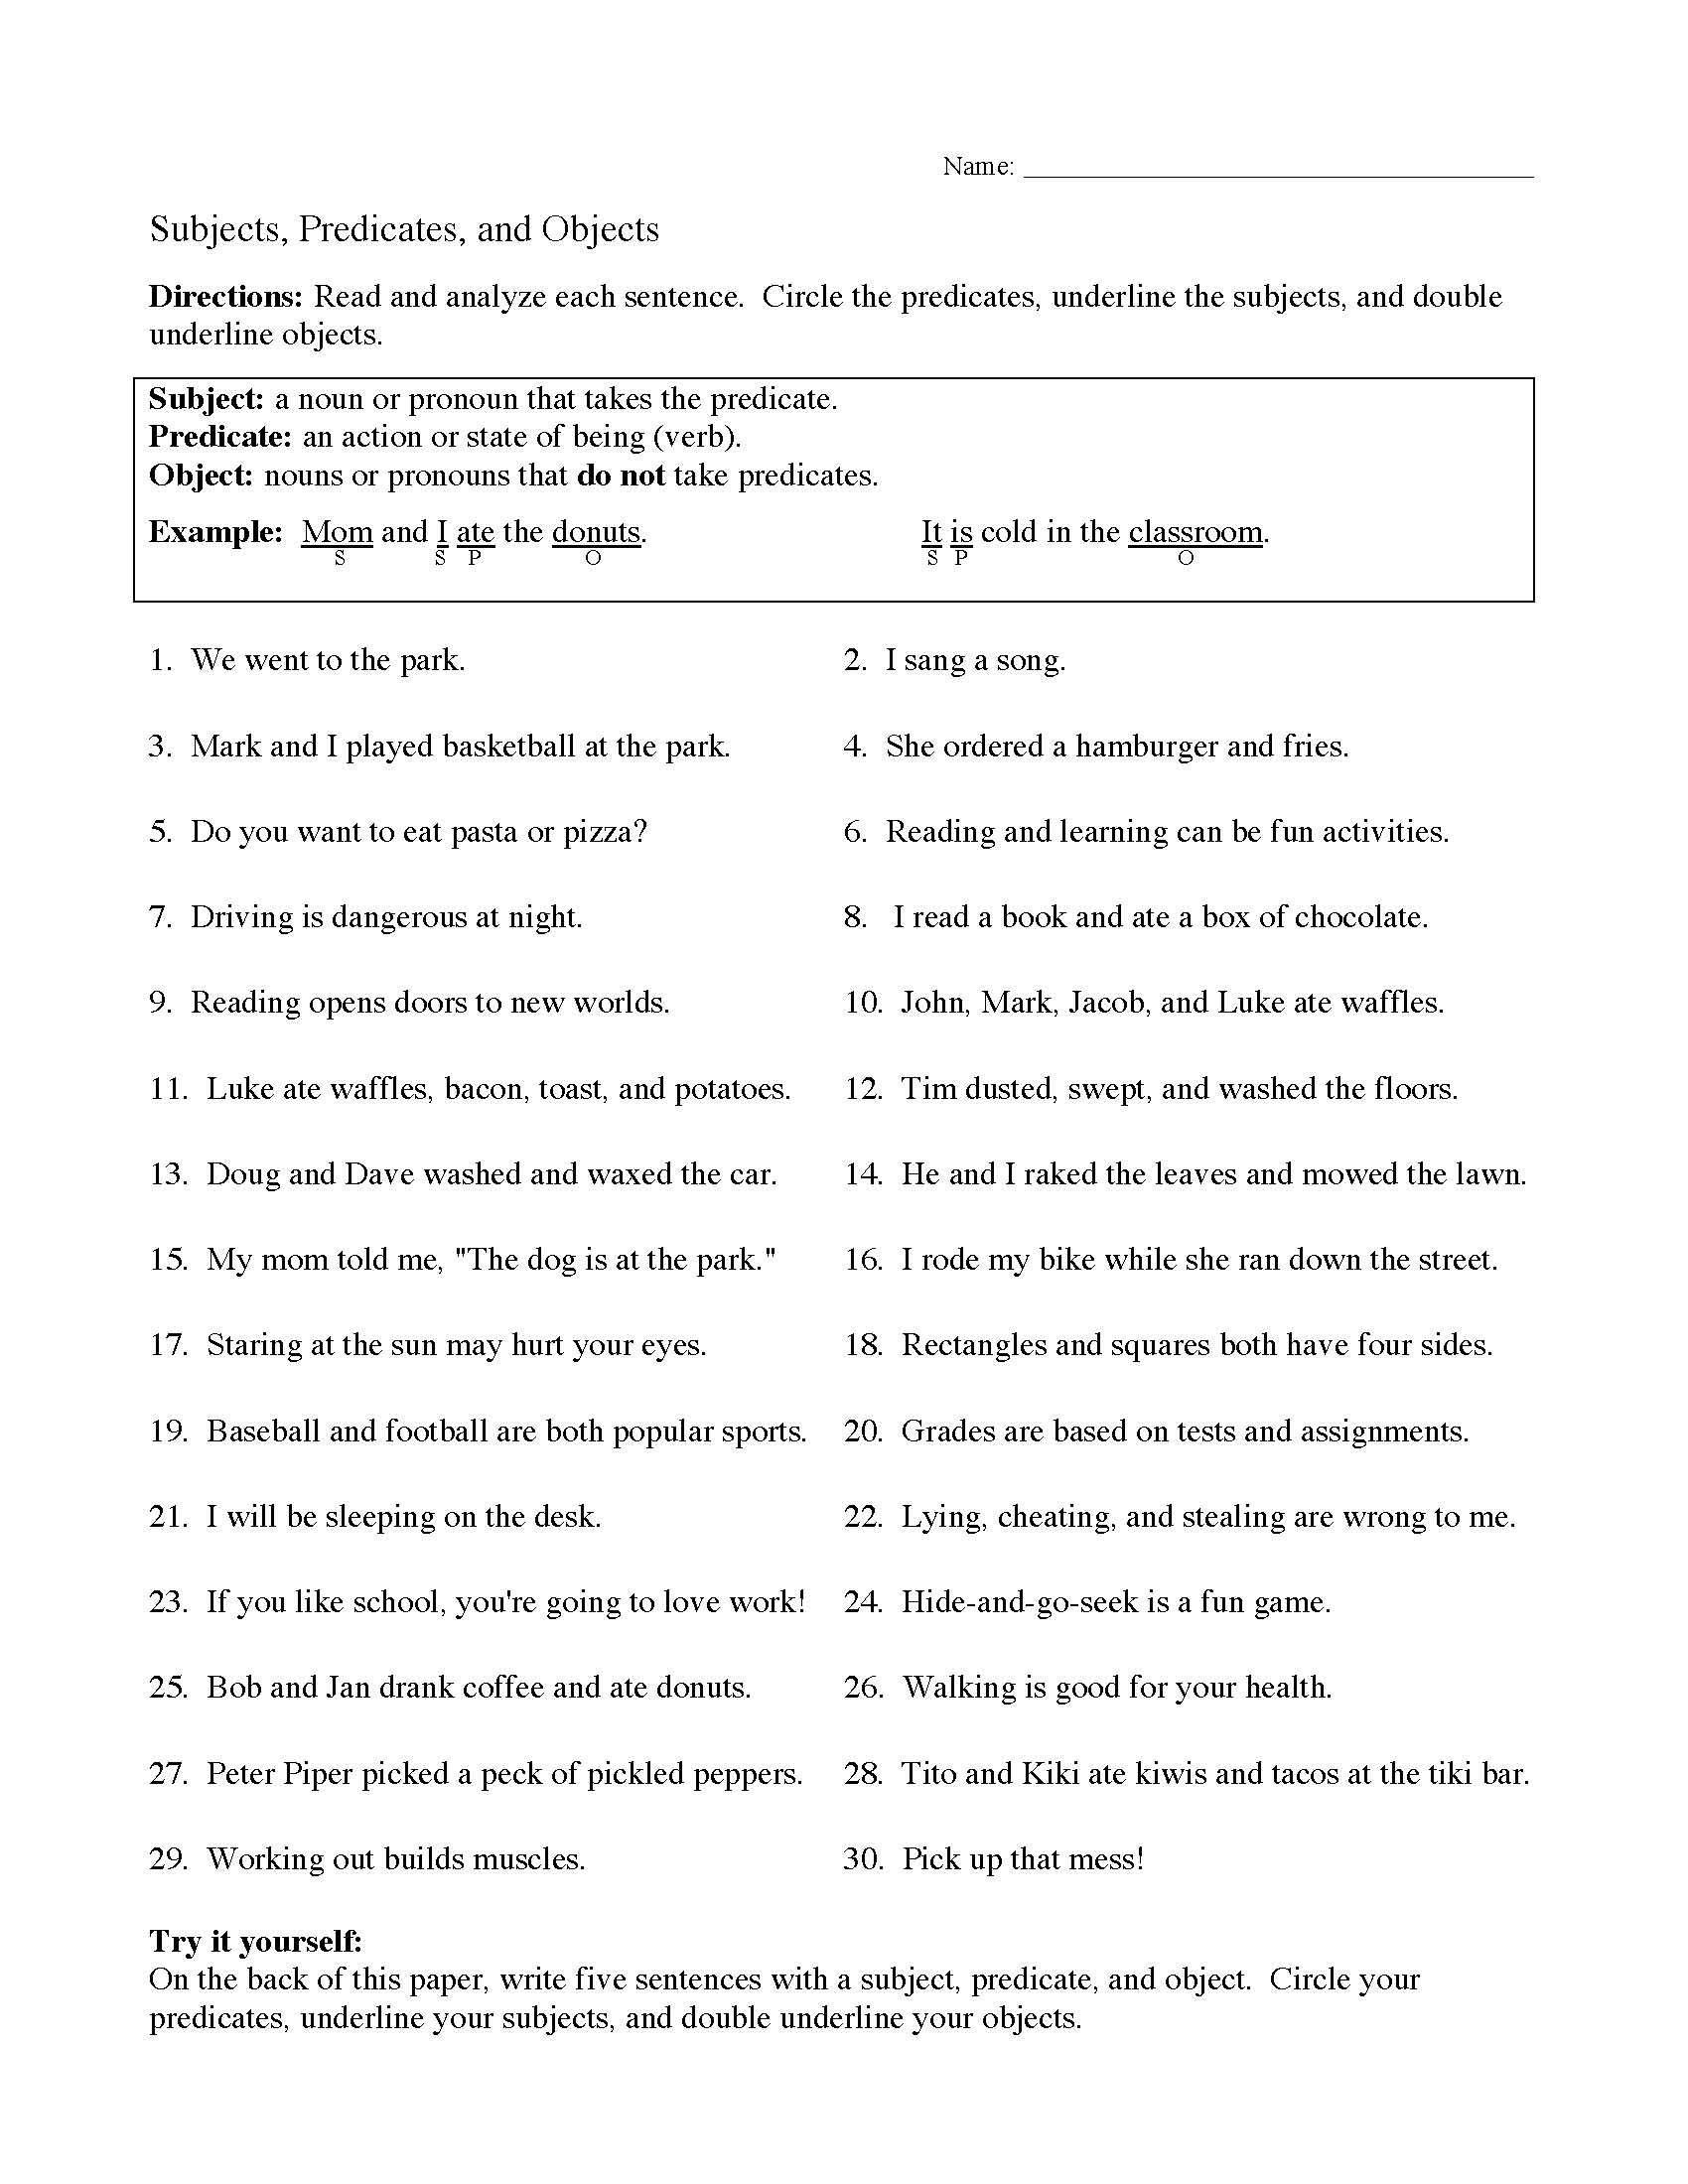 subjects-predicates-and-objects-worksheet-2-preview